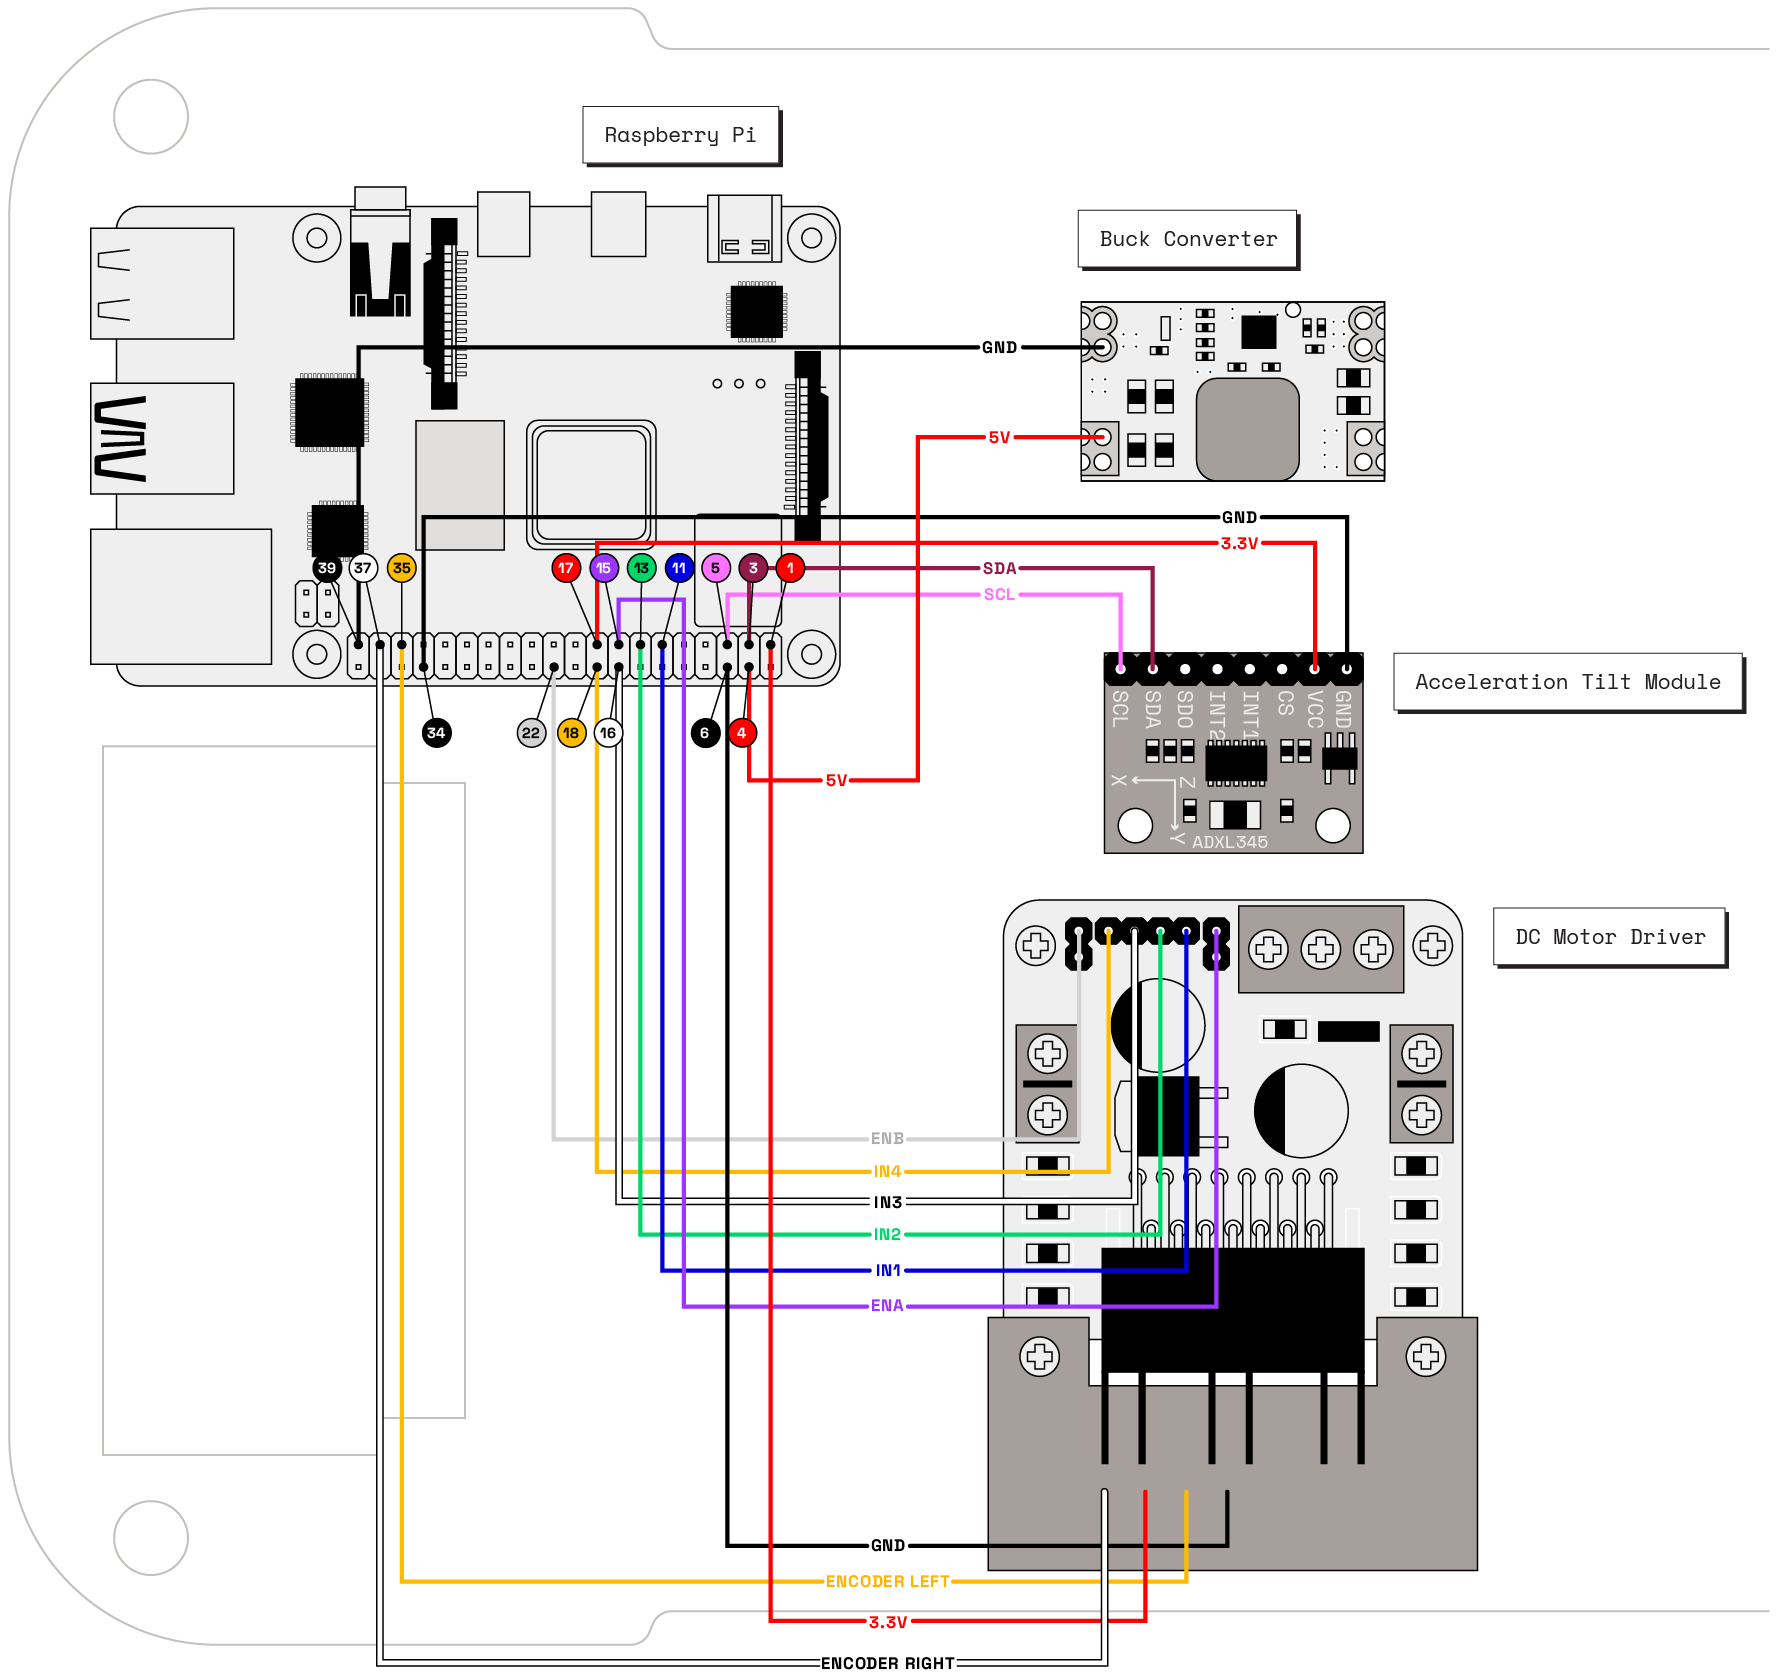 Closeup of the wiring diagram, showcasing the Pi, motor driver, accelerometer, and buck converter, wired according to the table below.